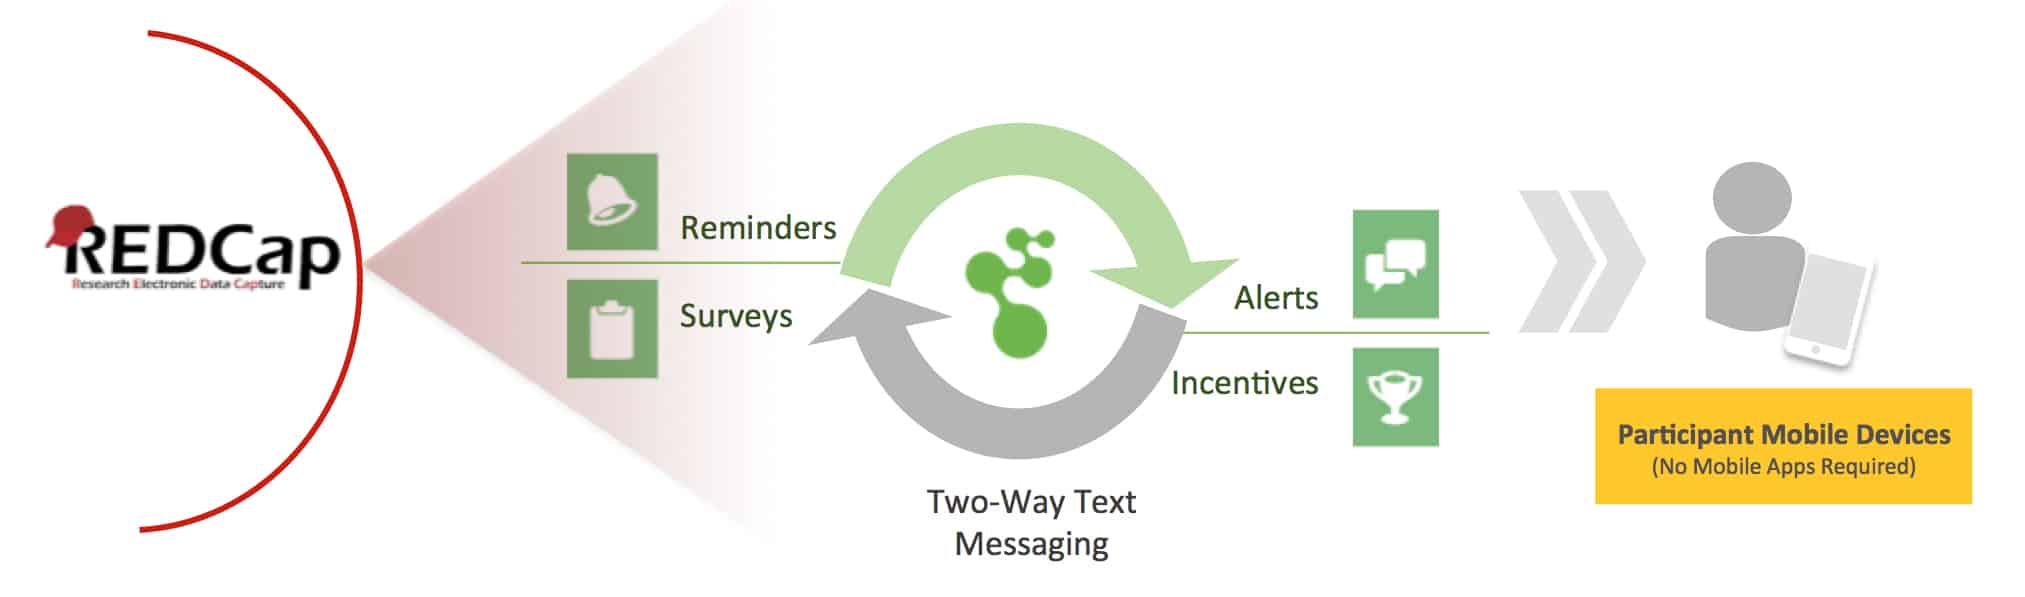 11 Ways Text Messaging Makes REDCap Data Capture Software Even More Powerful